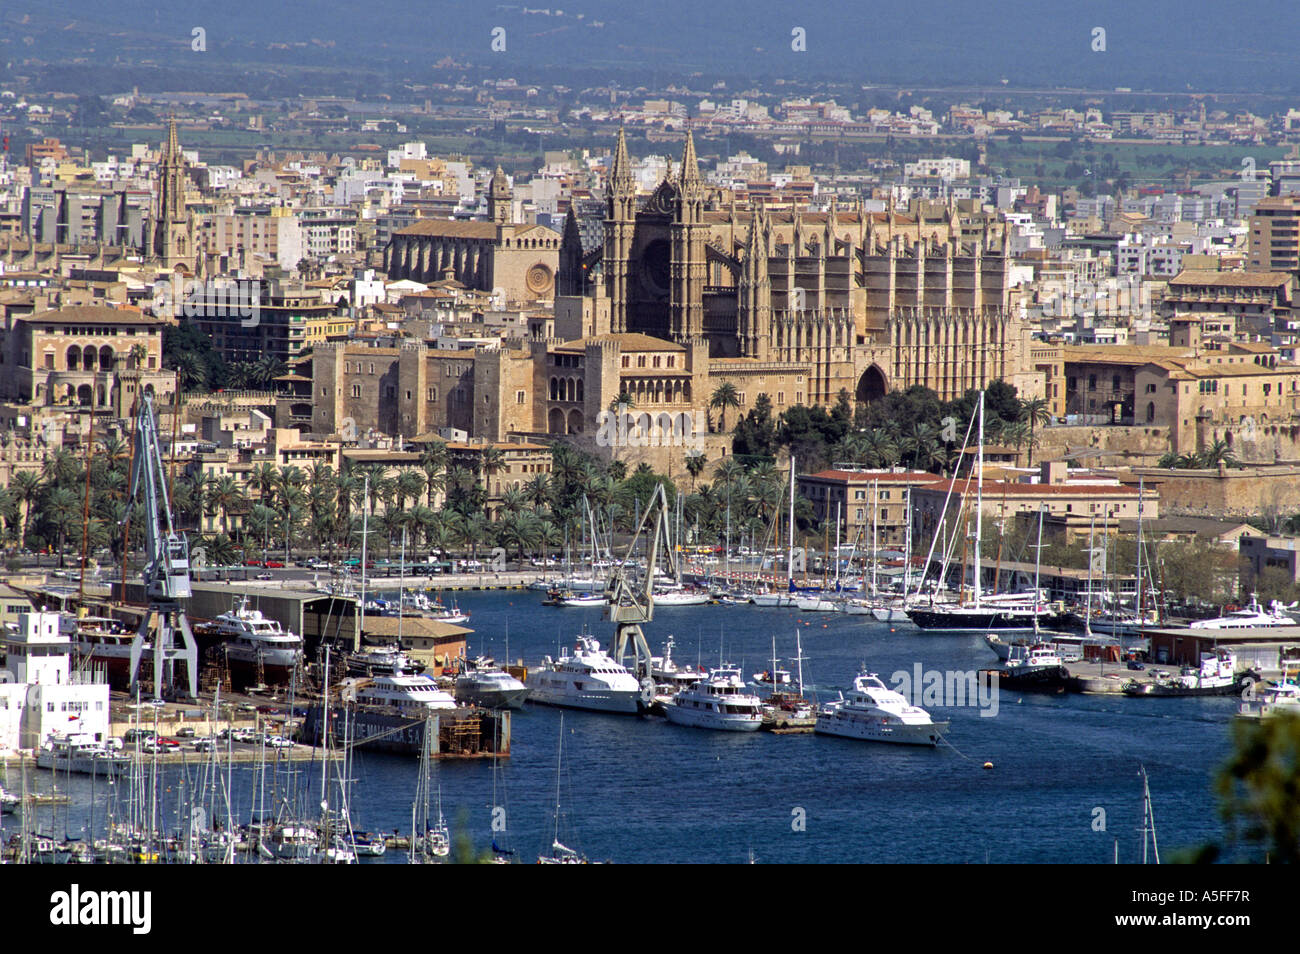 Cathedral and overview of Palma de Majorca Spain Stock Photo